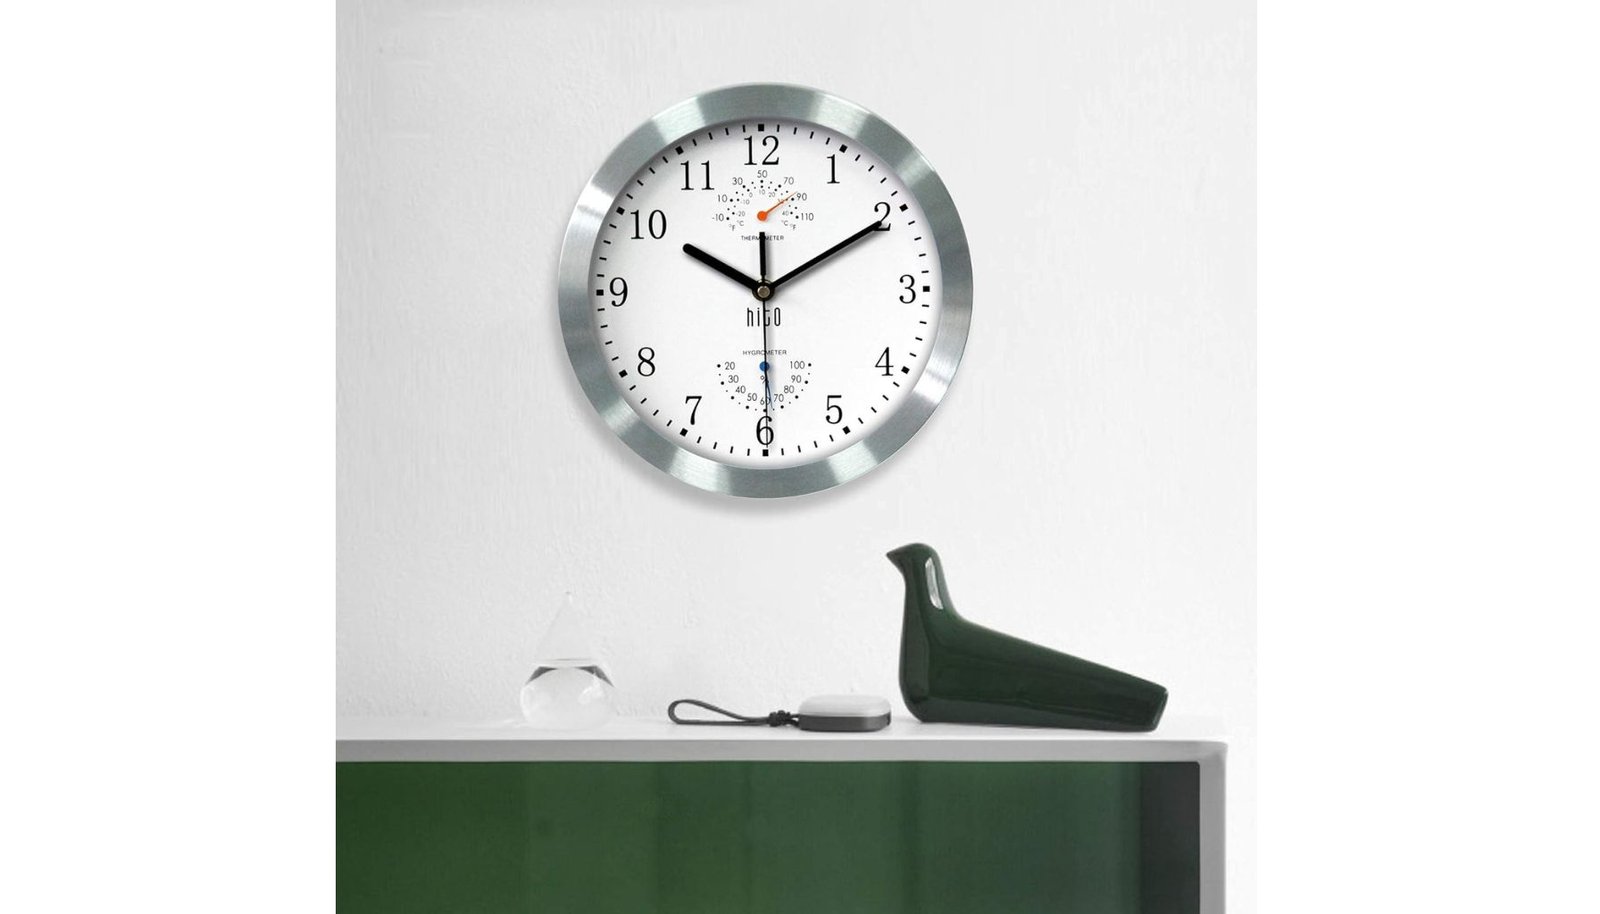 HITO 10 Inch Silent Silver Aluminum Frame Wall Clock Review